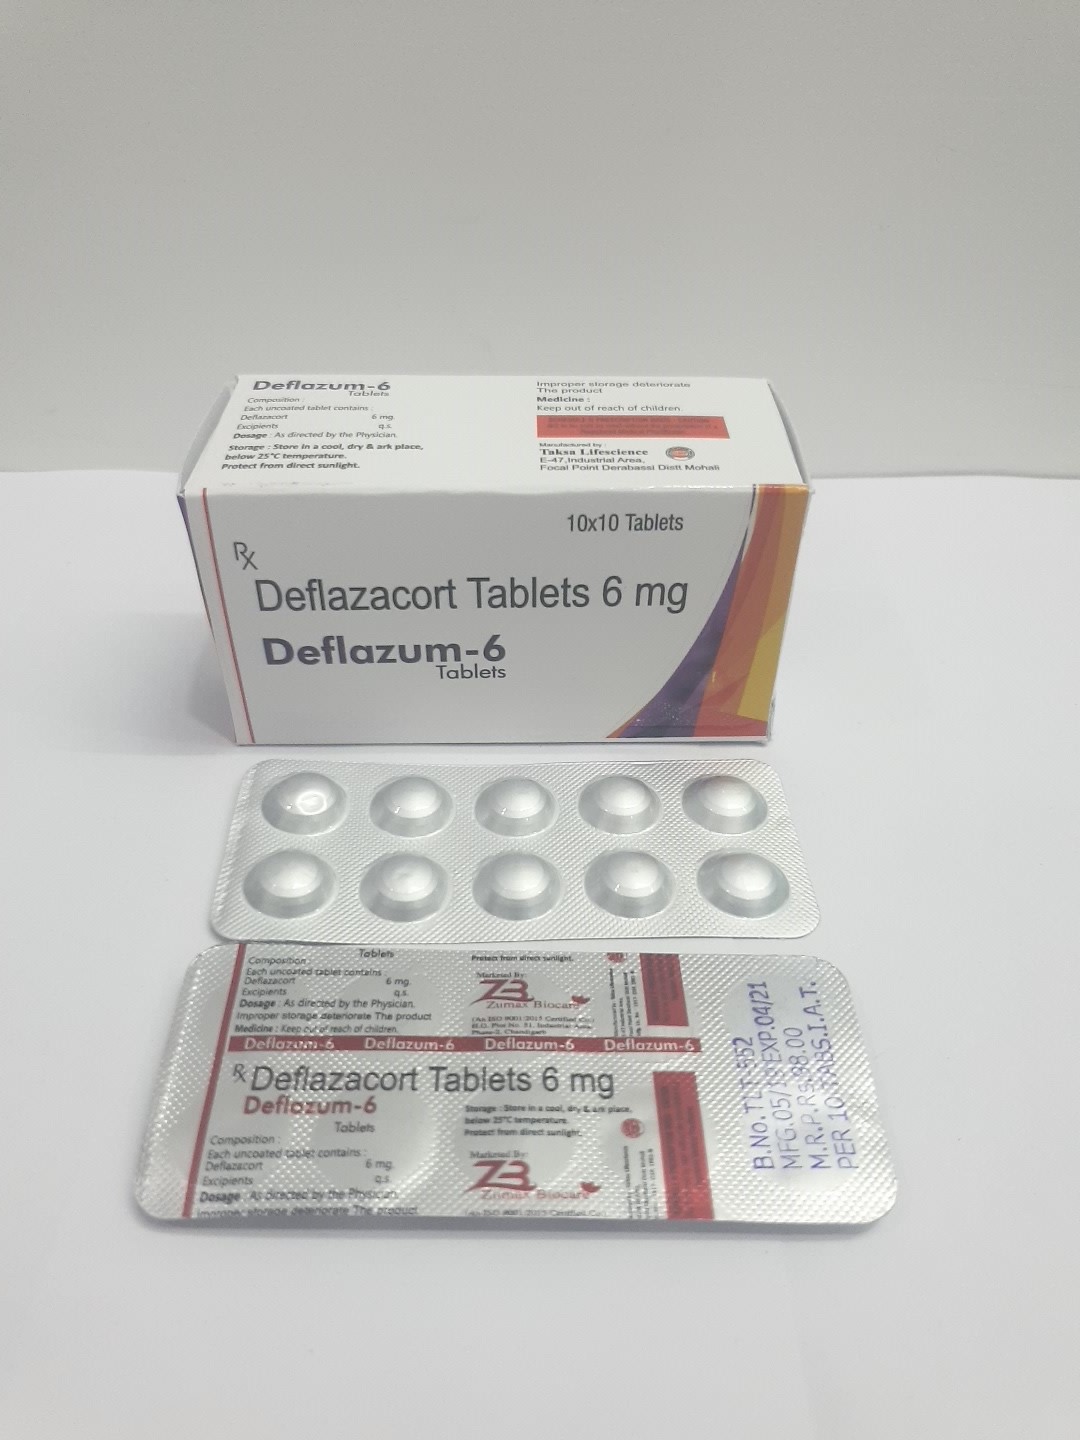 Product Name: Deflazum 6, Compositions of Deflazacort Tablets 6mg are Deflazacort Tablets 6mg - Zumax Biocare